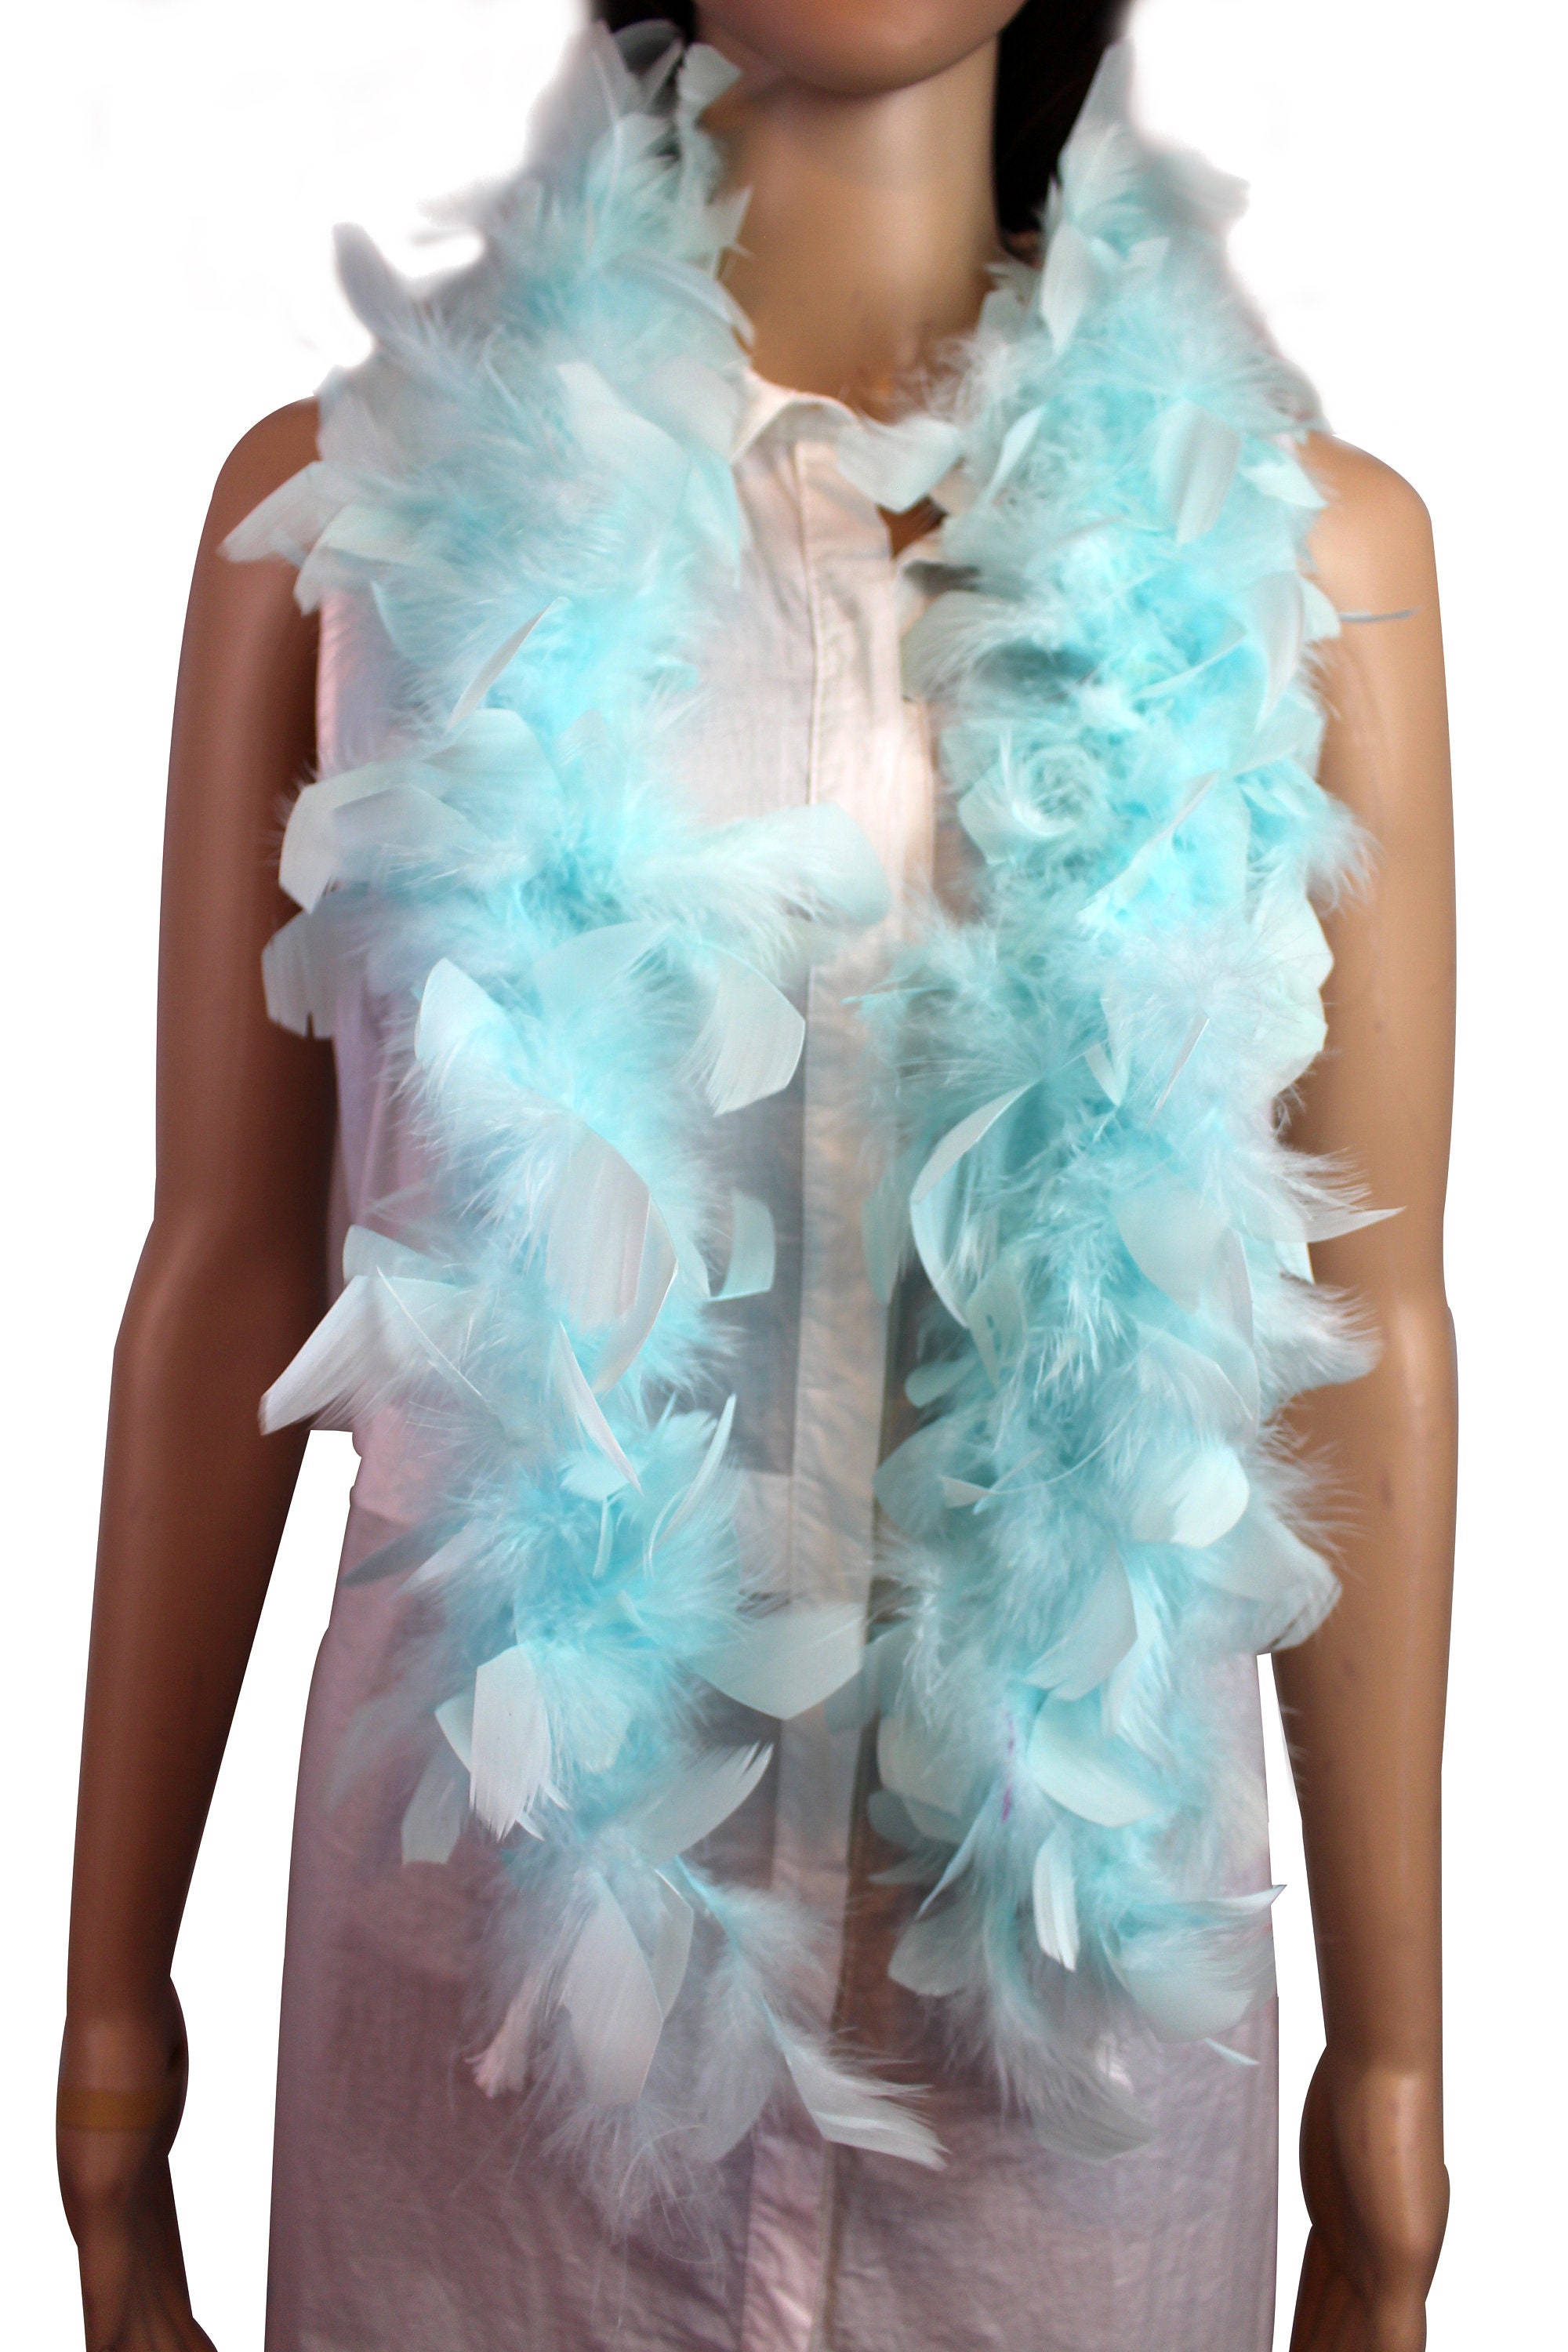 Baby Blue 4 Ply Ostrich Feather Boa Boas Scarf Prom Halloween Costumes  Birthday Gifts Dancing Decorations Cynthia's Feathers SKU: 9P12 